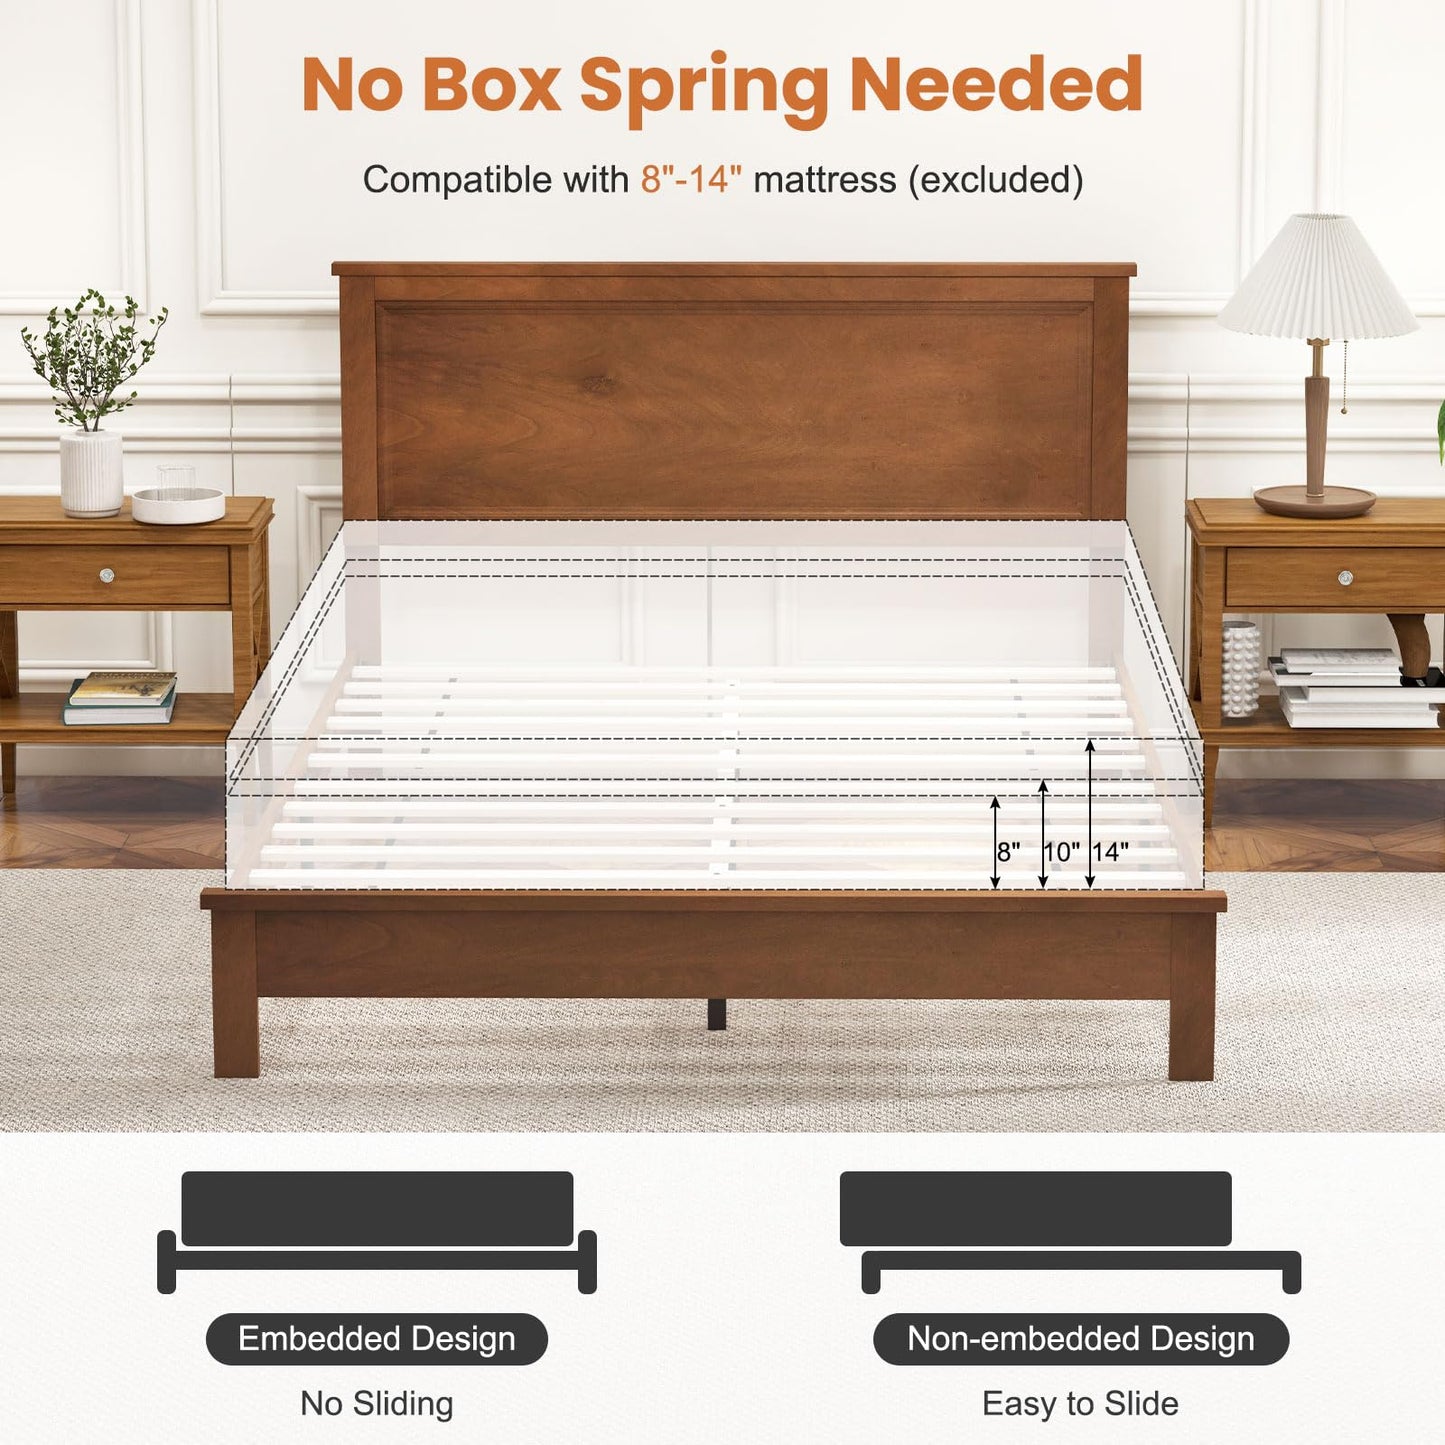 Giantex Wood Queen Platform Bed Frame with Headboard Walnut, Mid Century Bed Frame with Solid Wood Legs & Wooden Slat Support, Pallet Bed Mattress